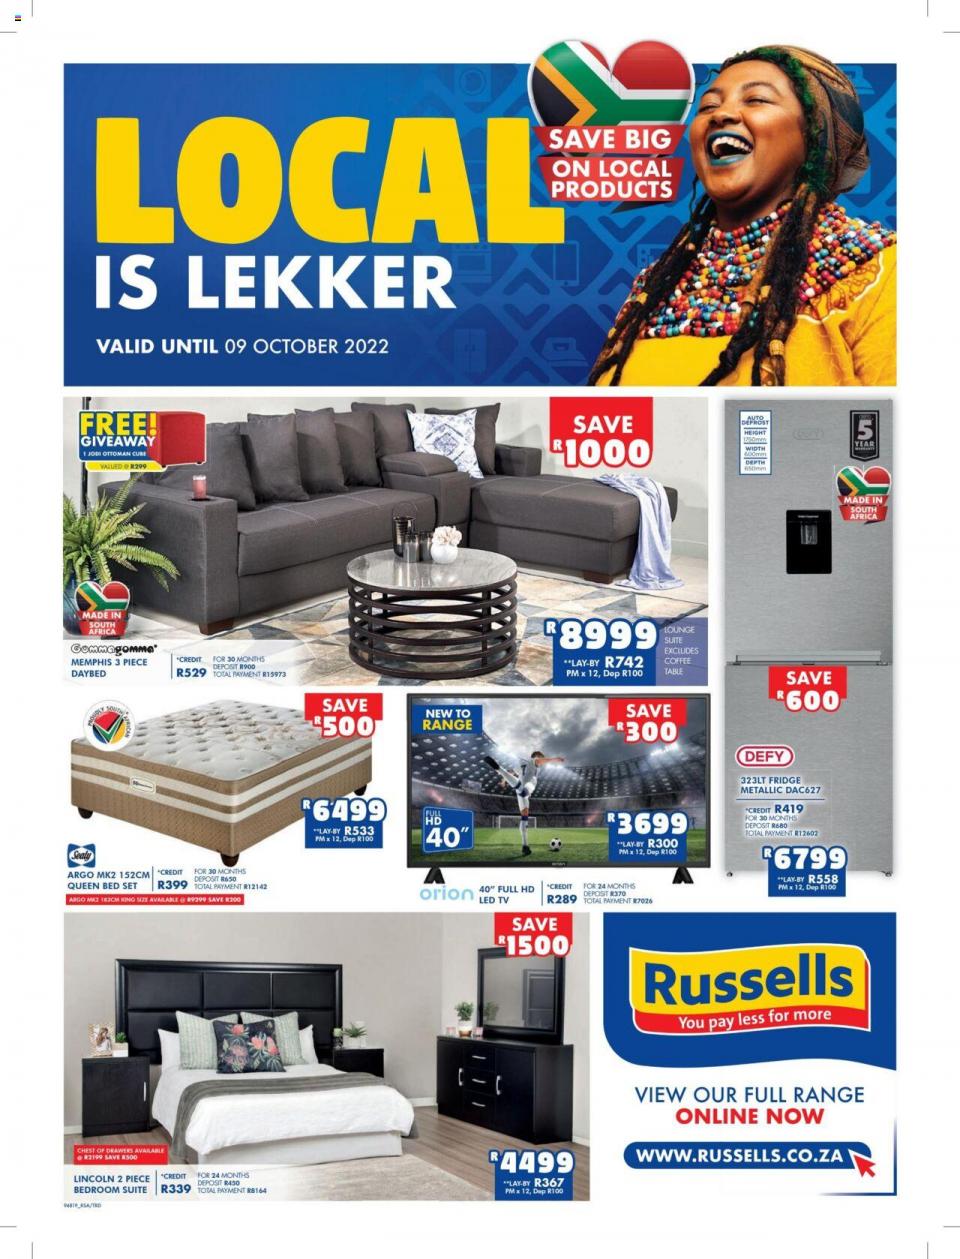 Russells Catalogue 5 Sep 2022 Russell Specials Russell Furniture